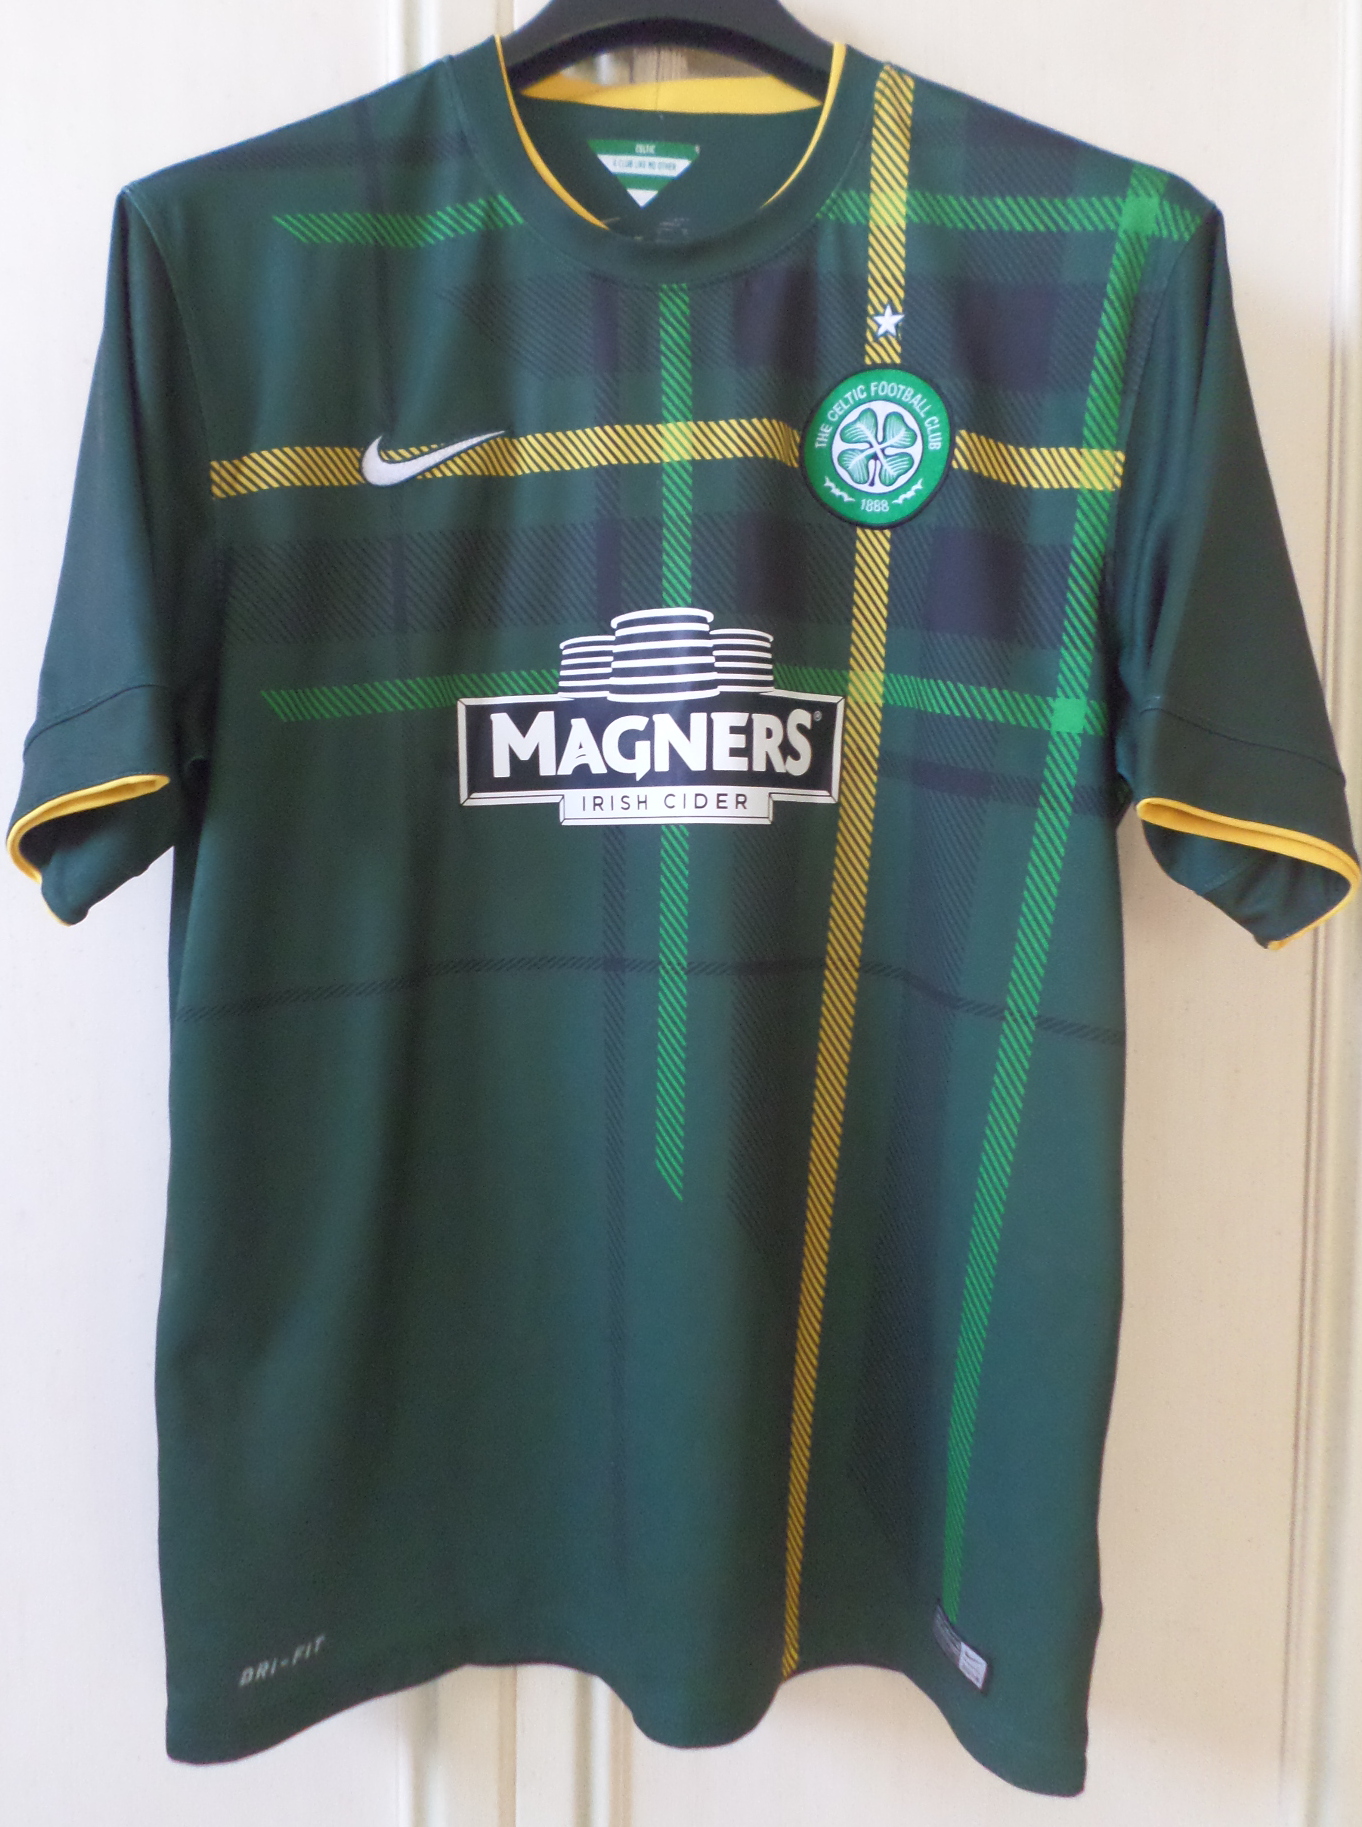 CELTIC MAGNERS AWAY 1415 - XL